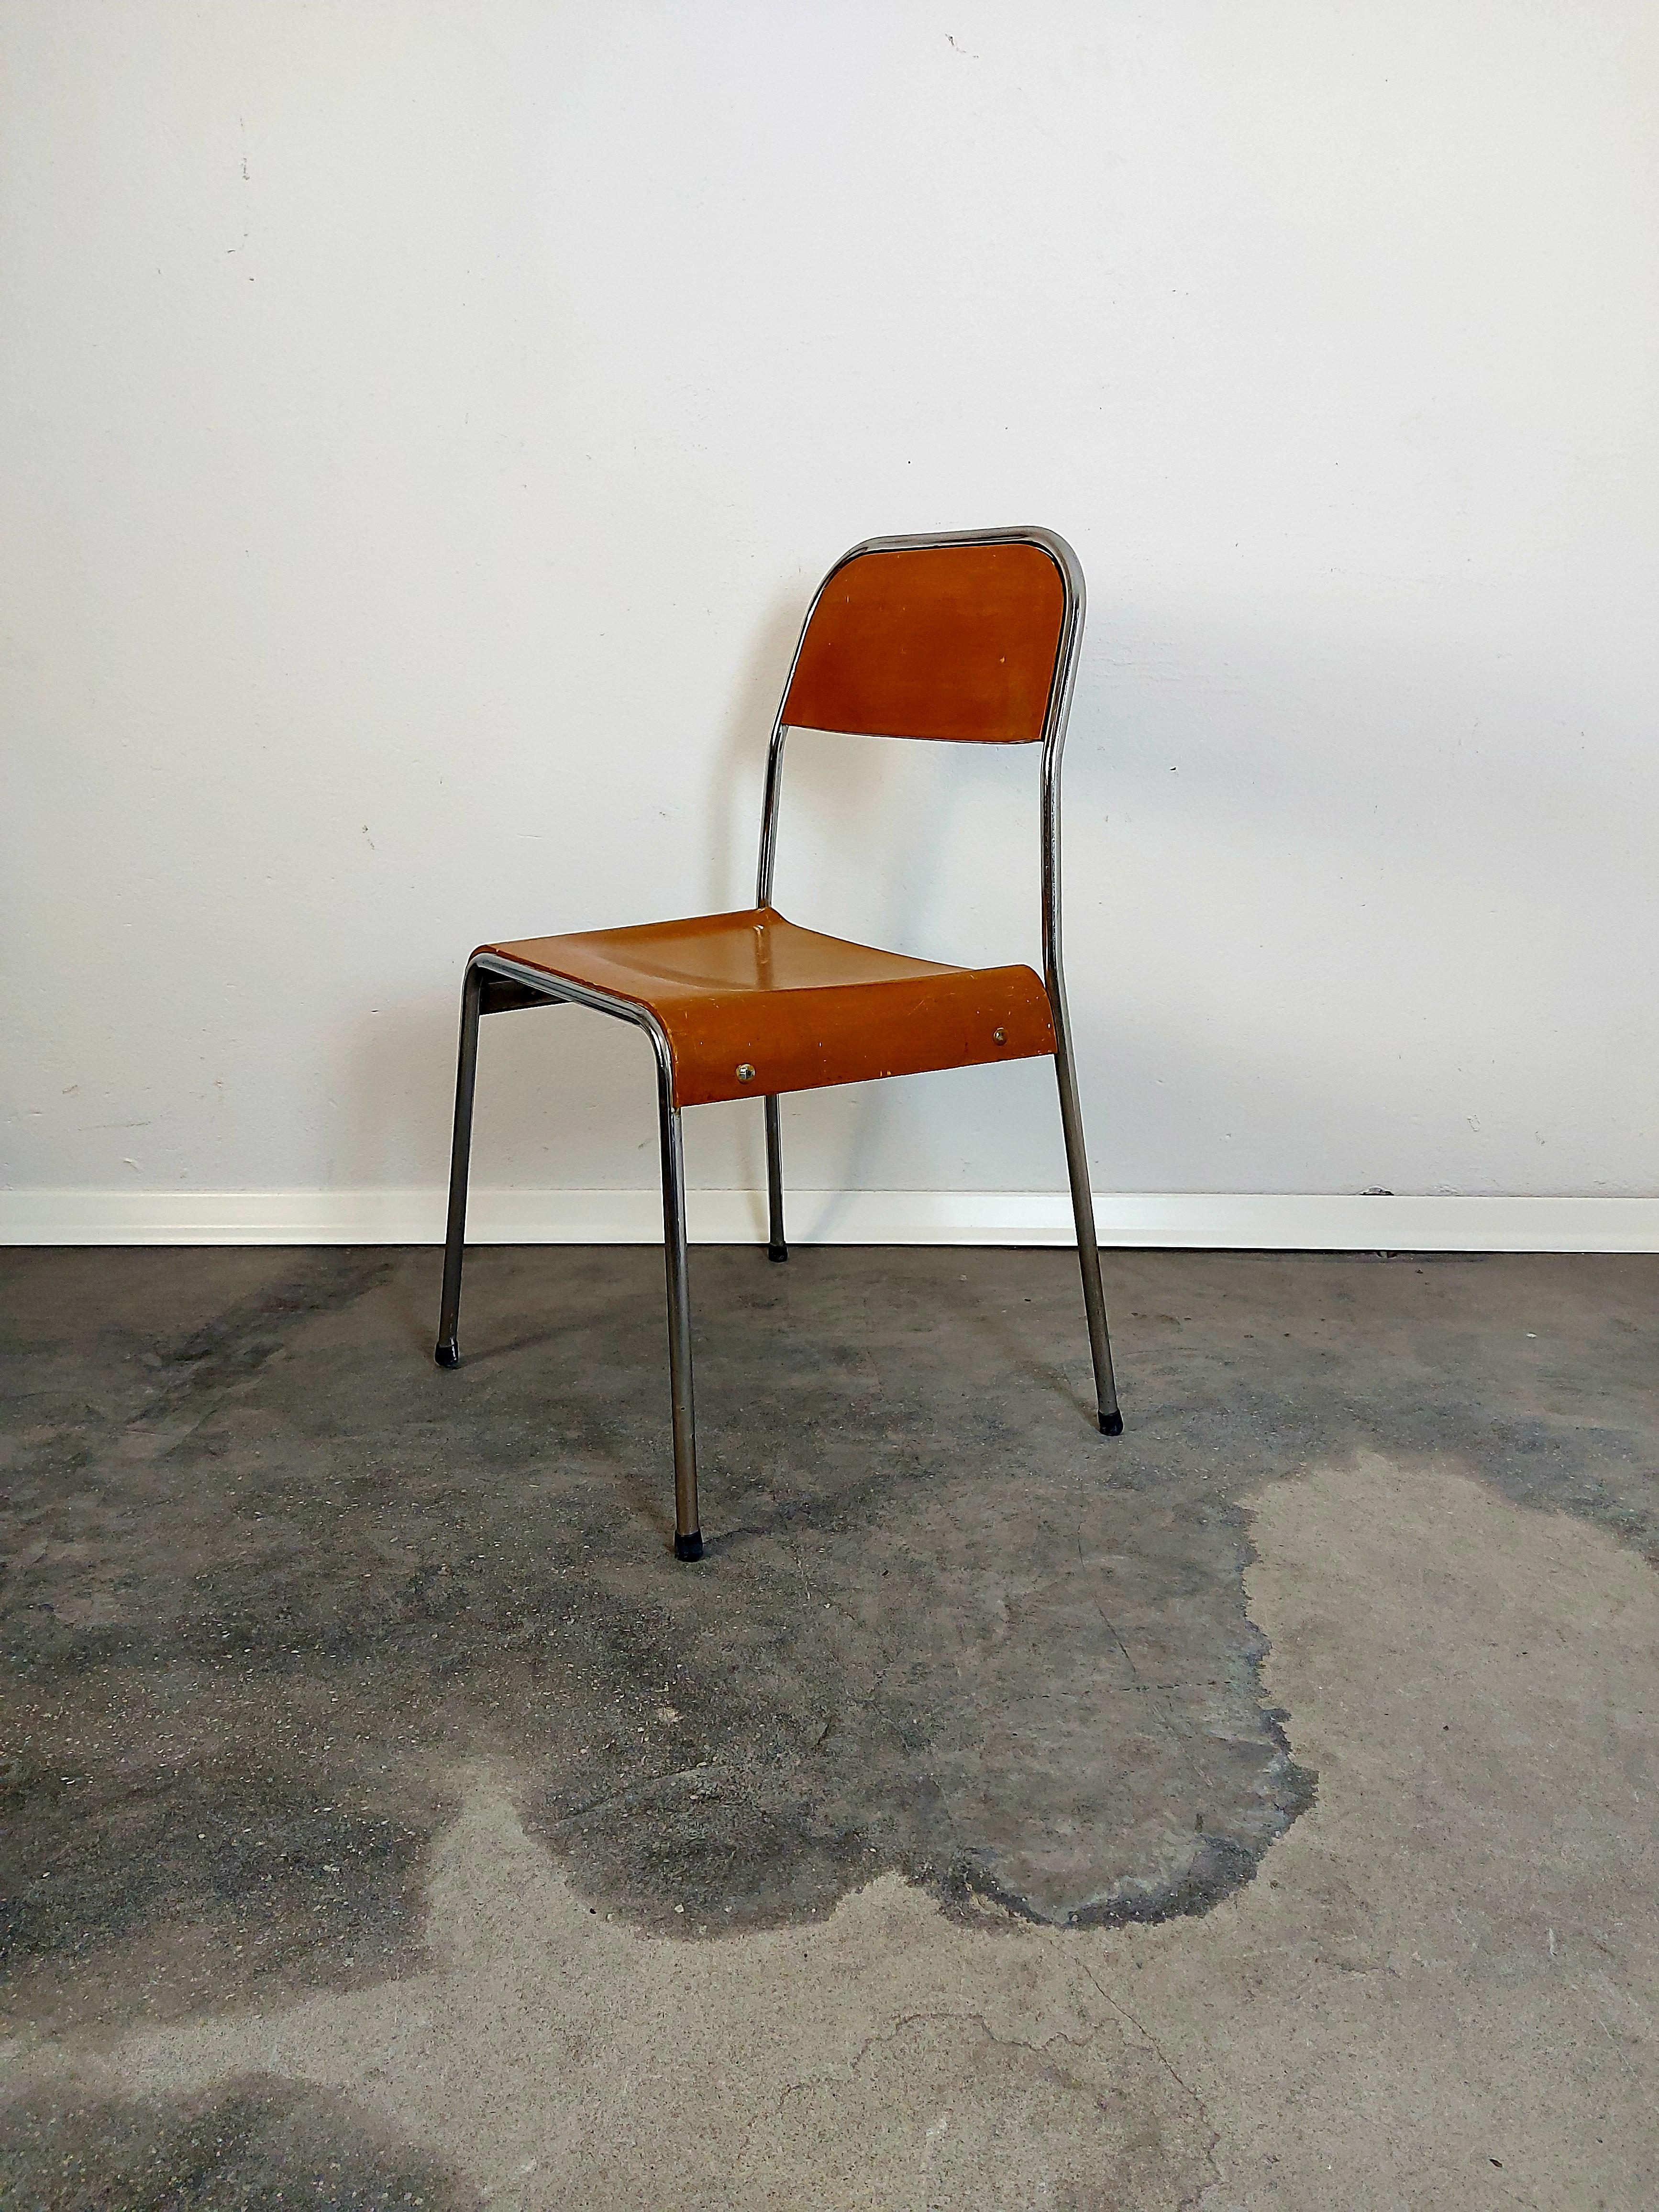 Stackable chairs
Manufacturer: Stol Kamnik
Country of Manufacturer: Slovenia
Period: 1970s
Materials: Chrome, plywood
Condition: good vintage condition.